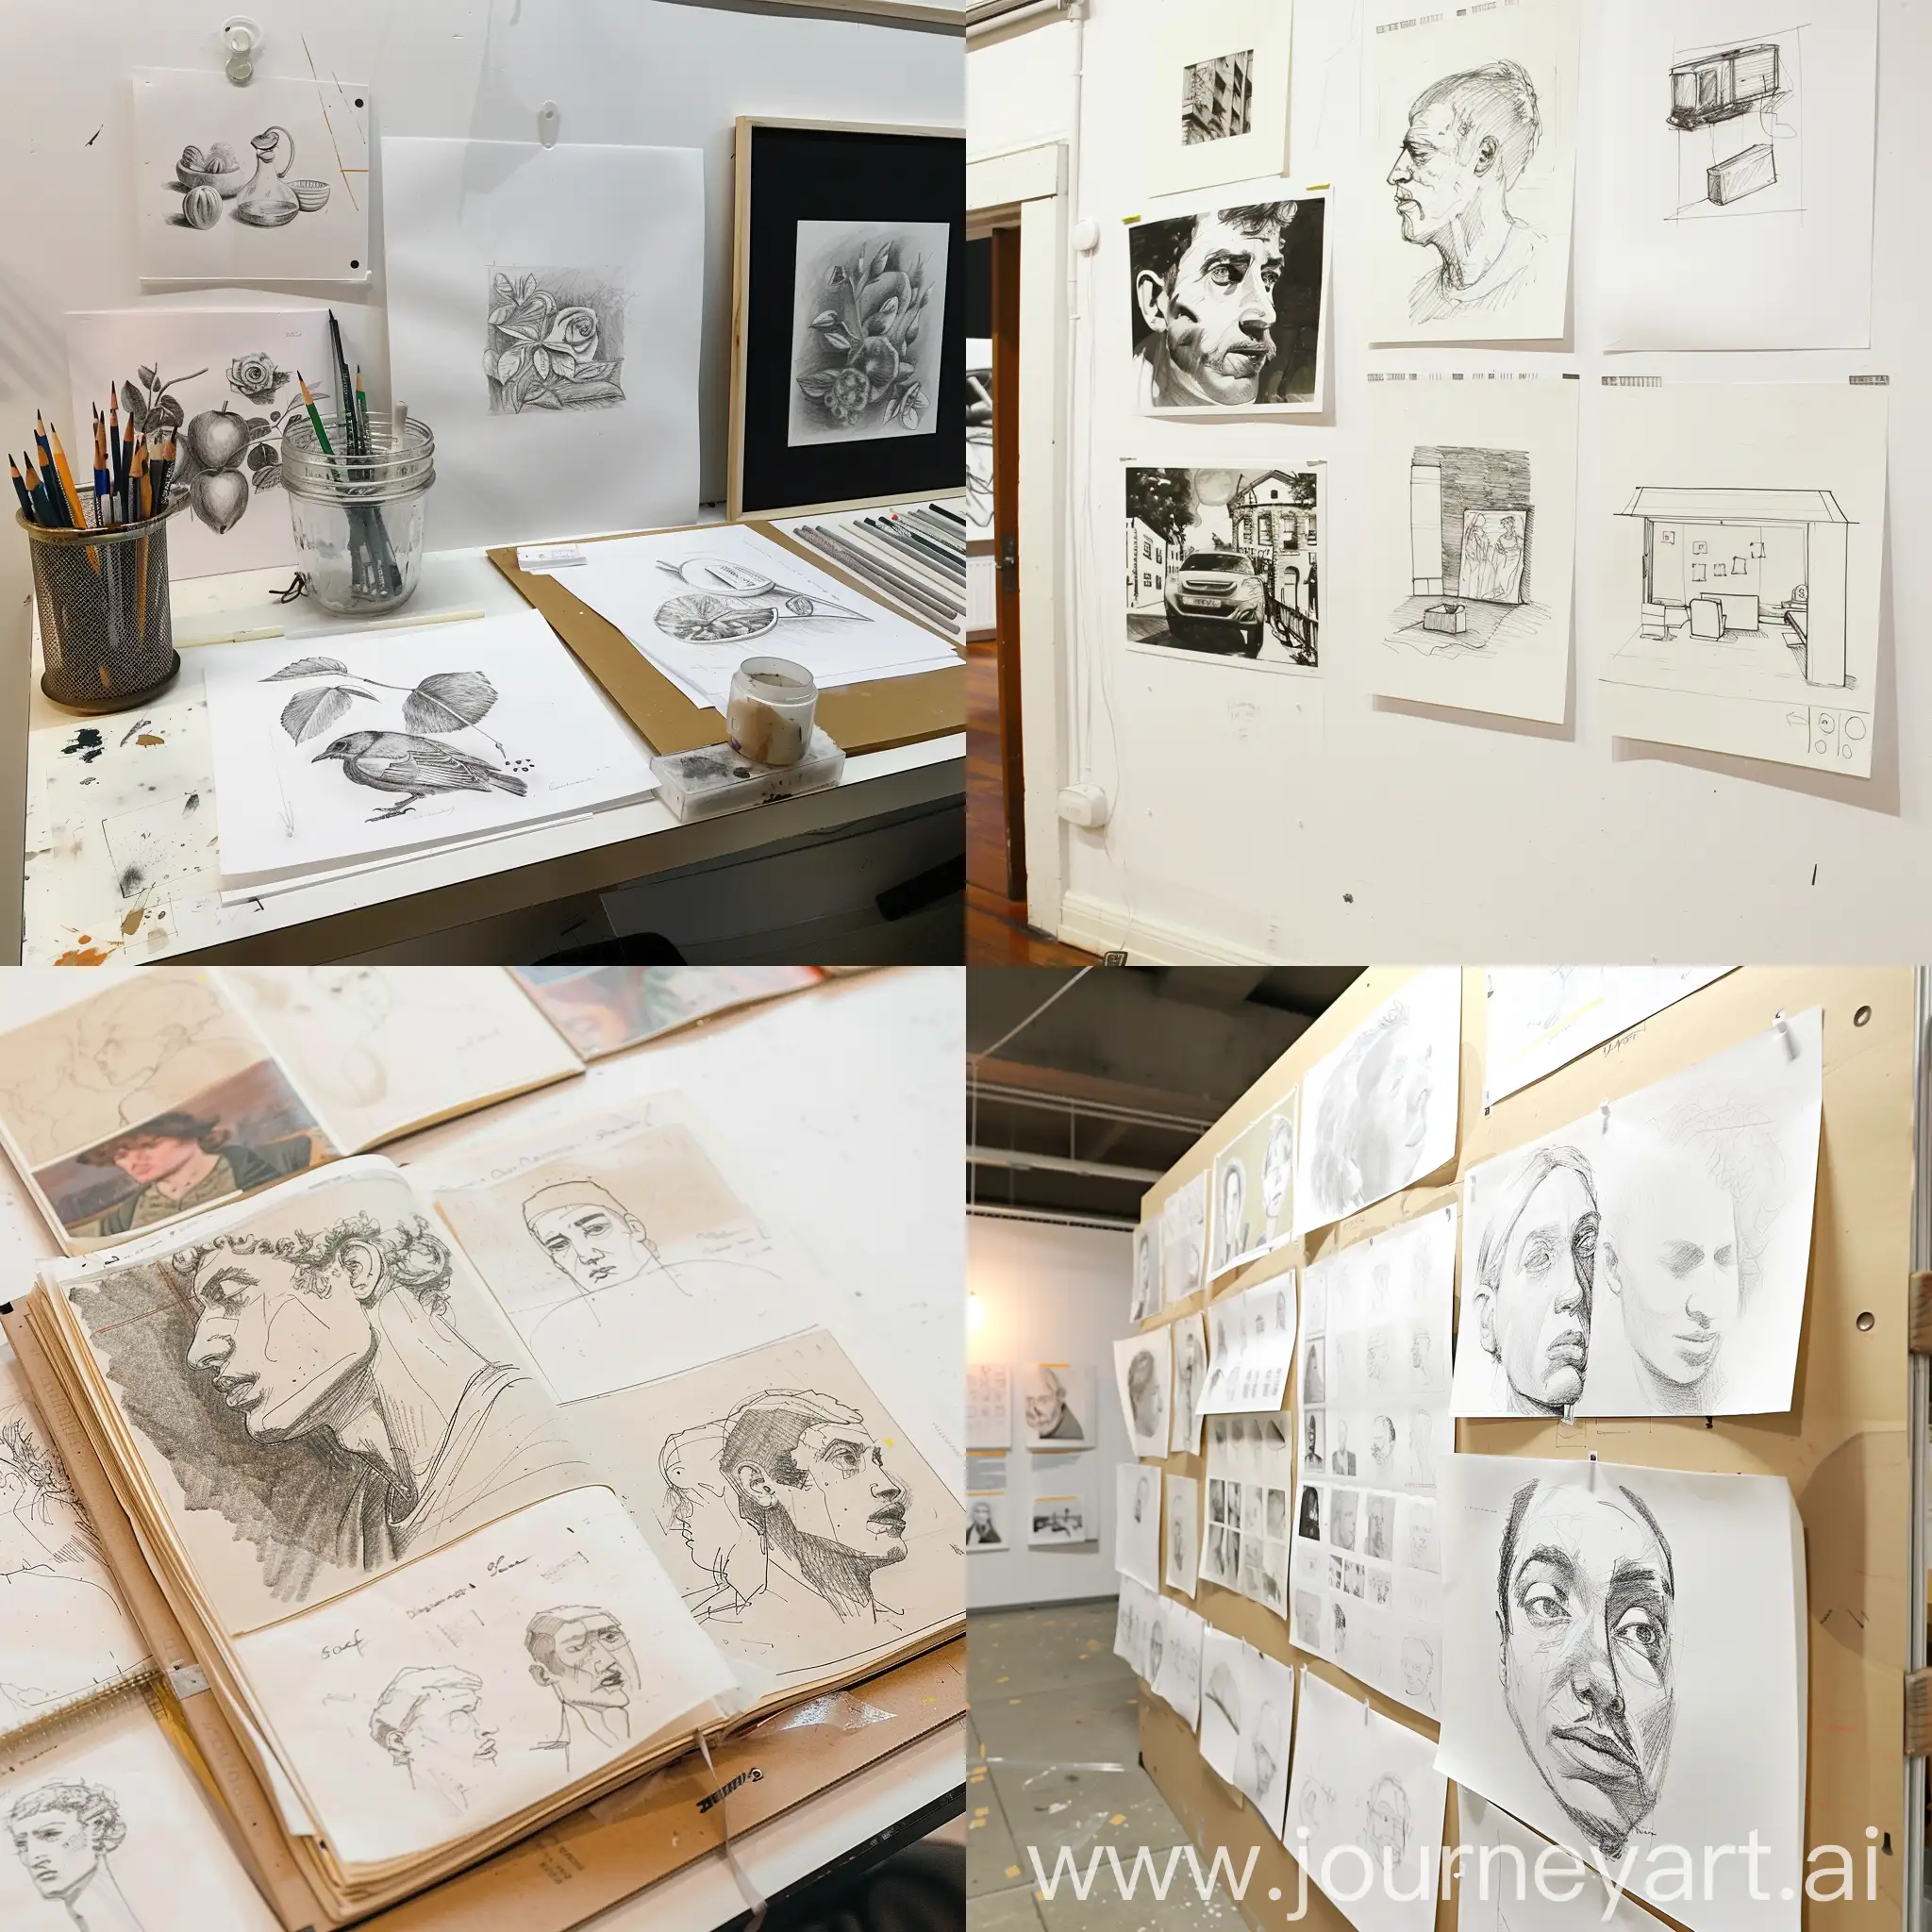 Exhibition-Drawing-Layout-Simplistic-Display-of-Diverse-Artworks